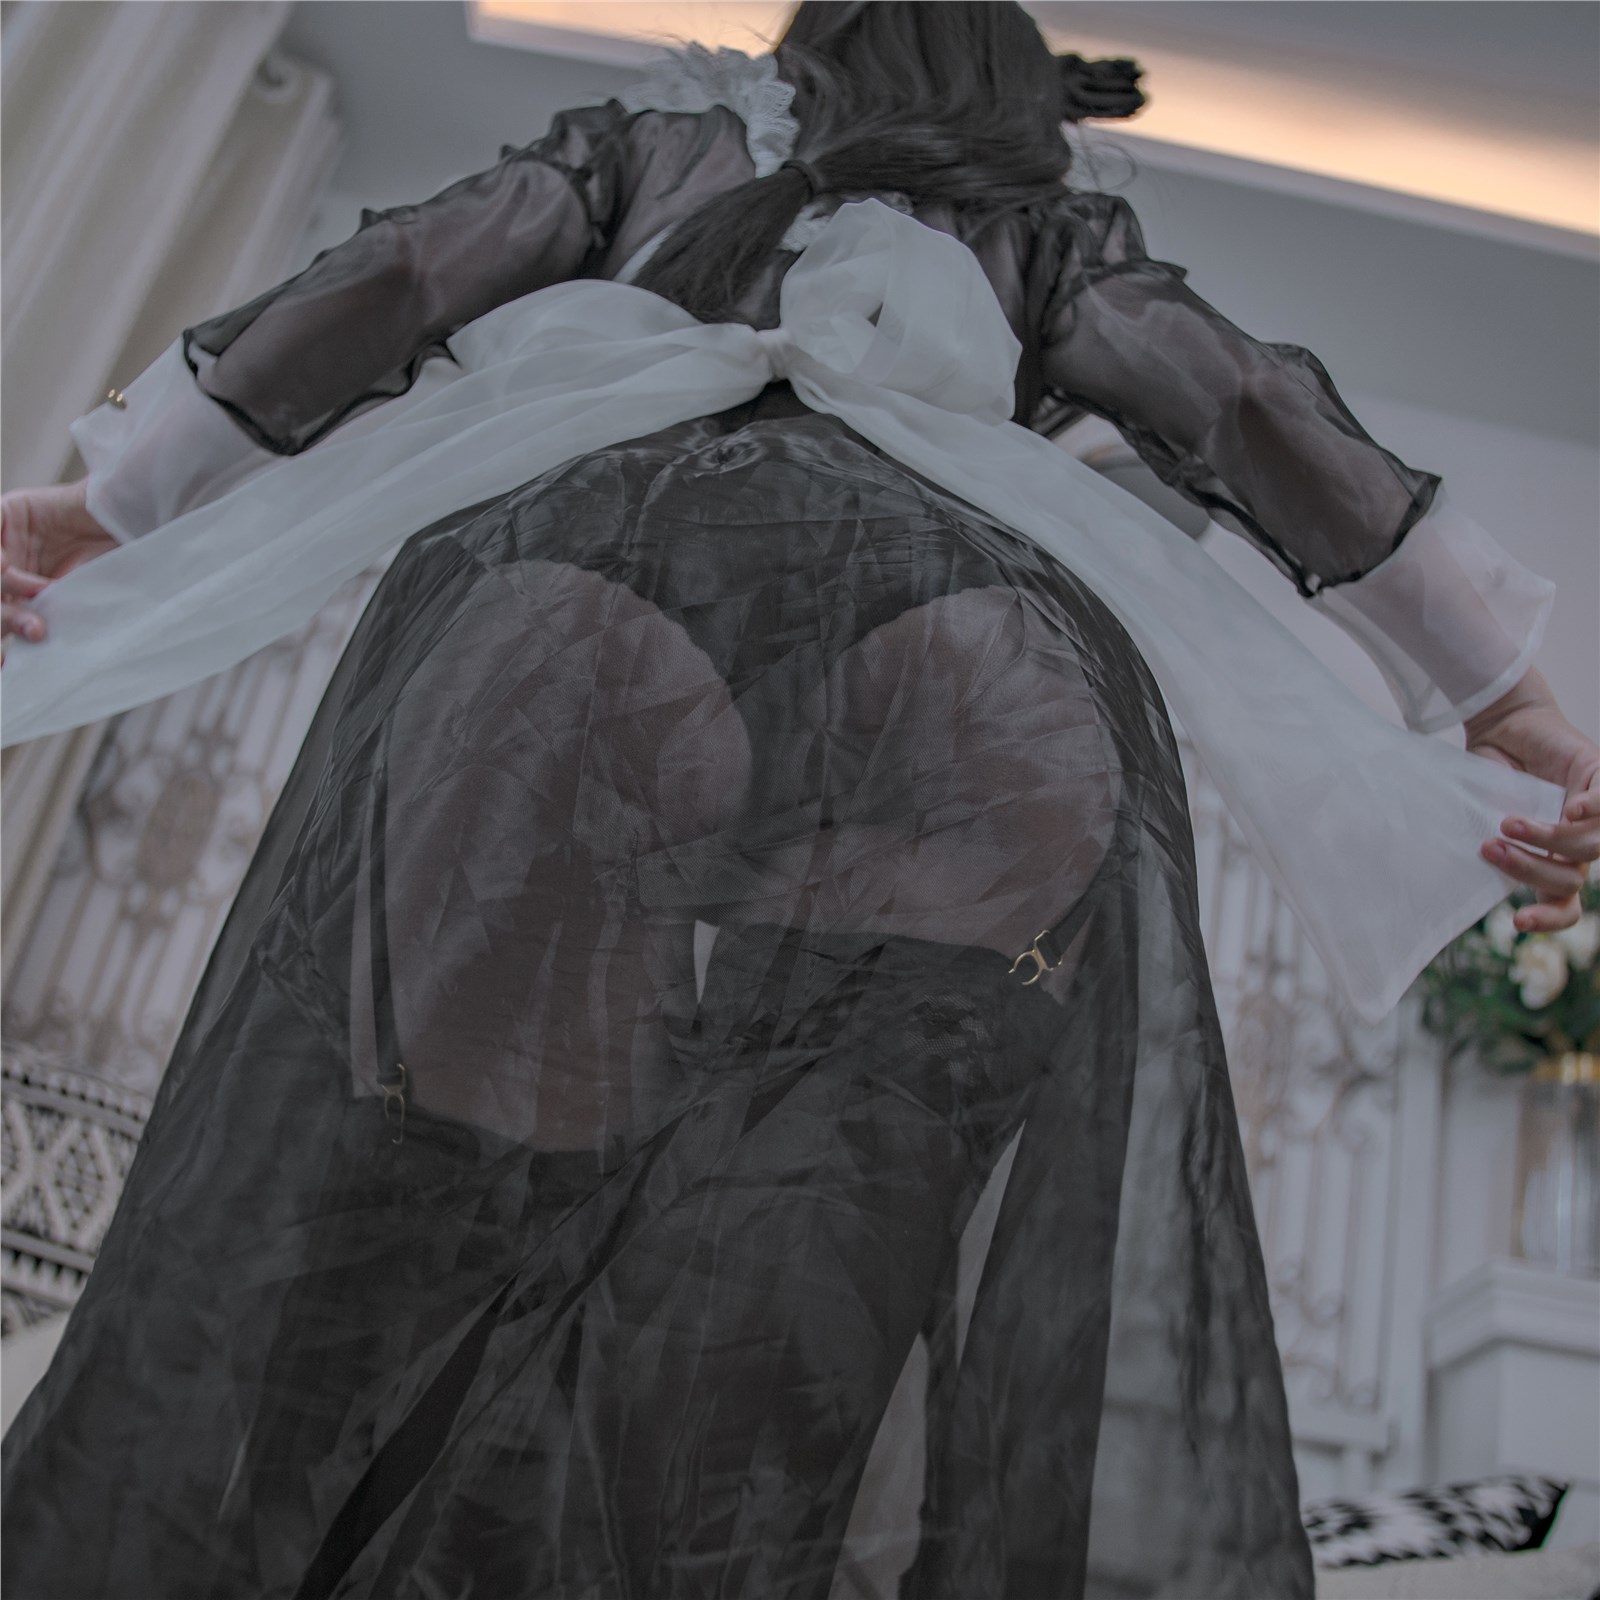 Cosplay cheese Wii - black transparent maid(34)